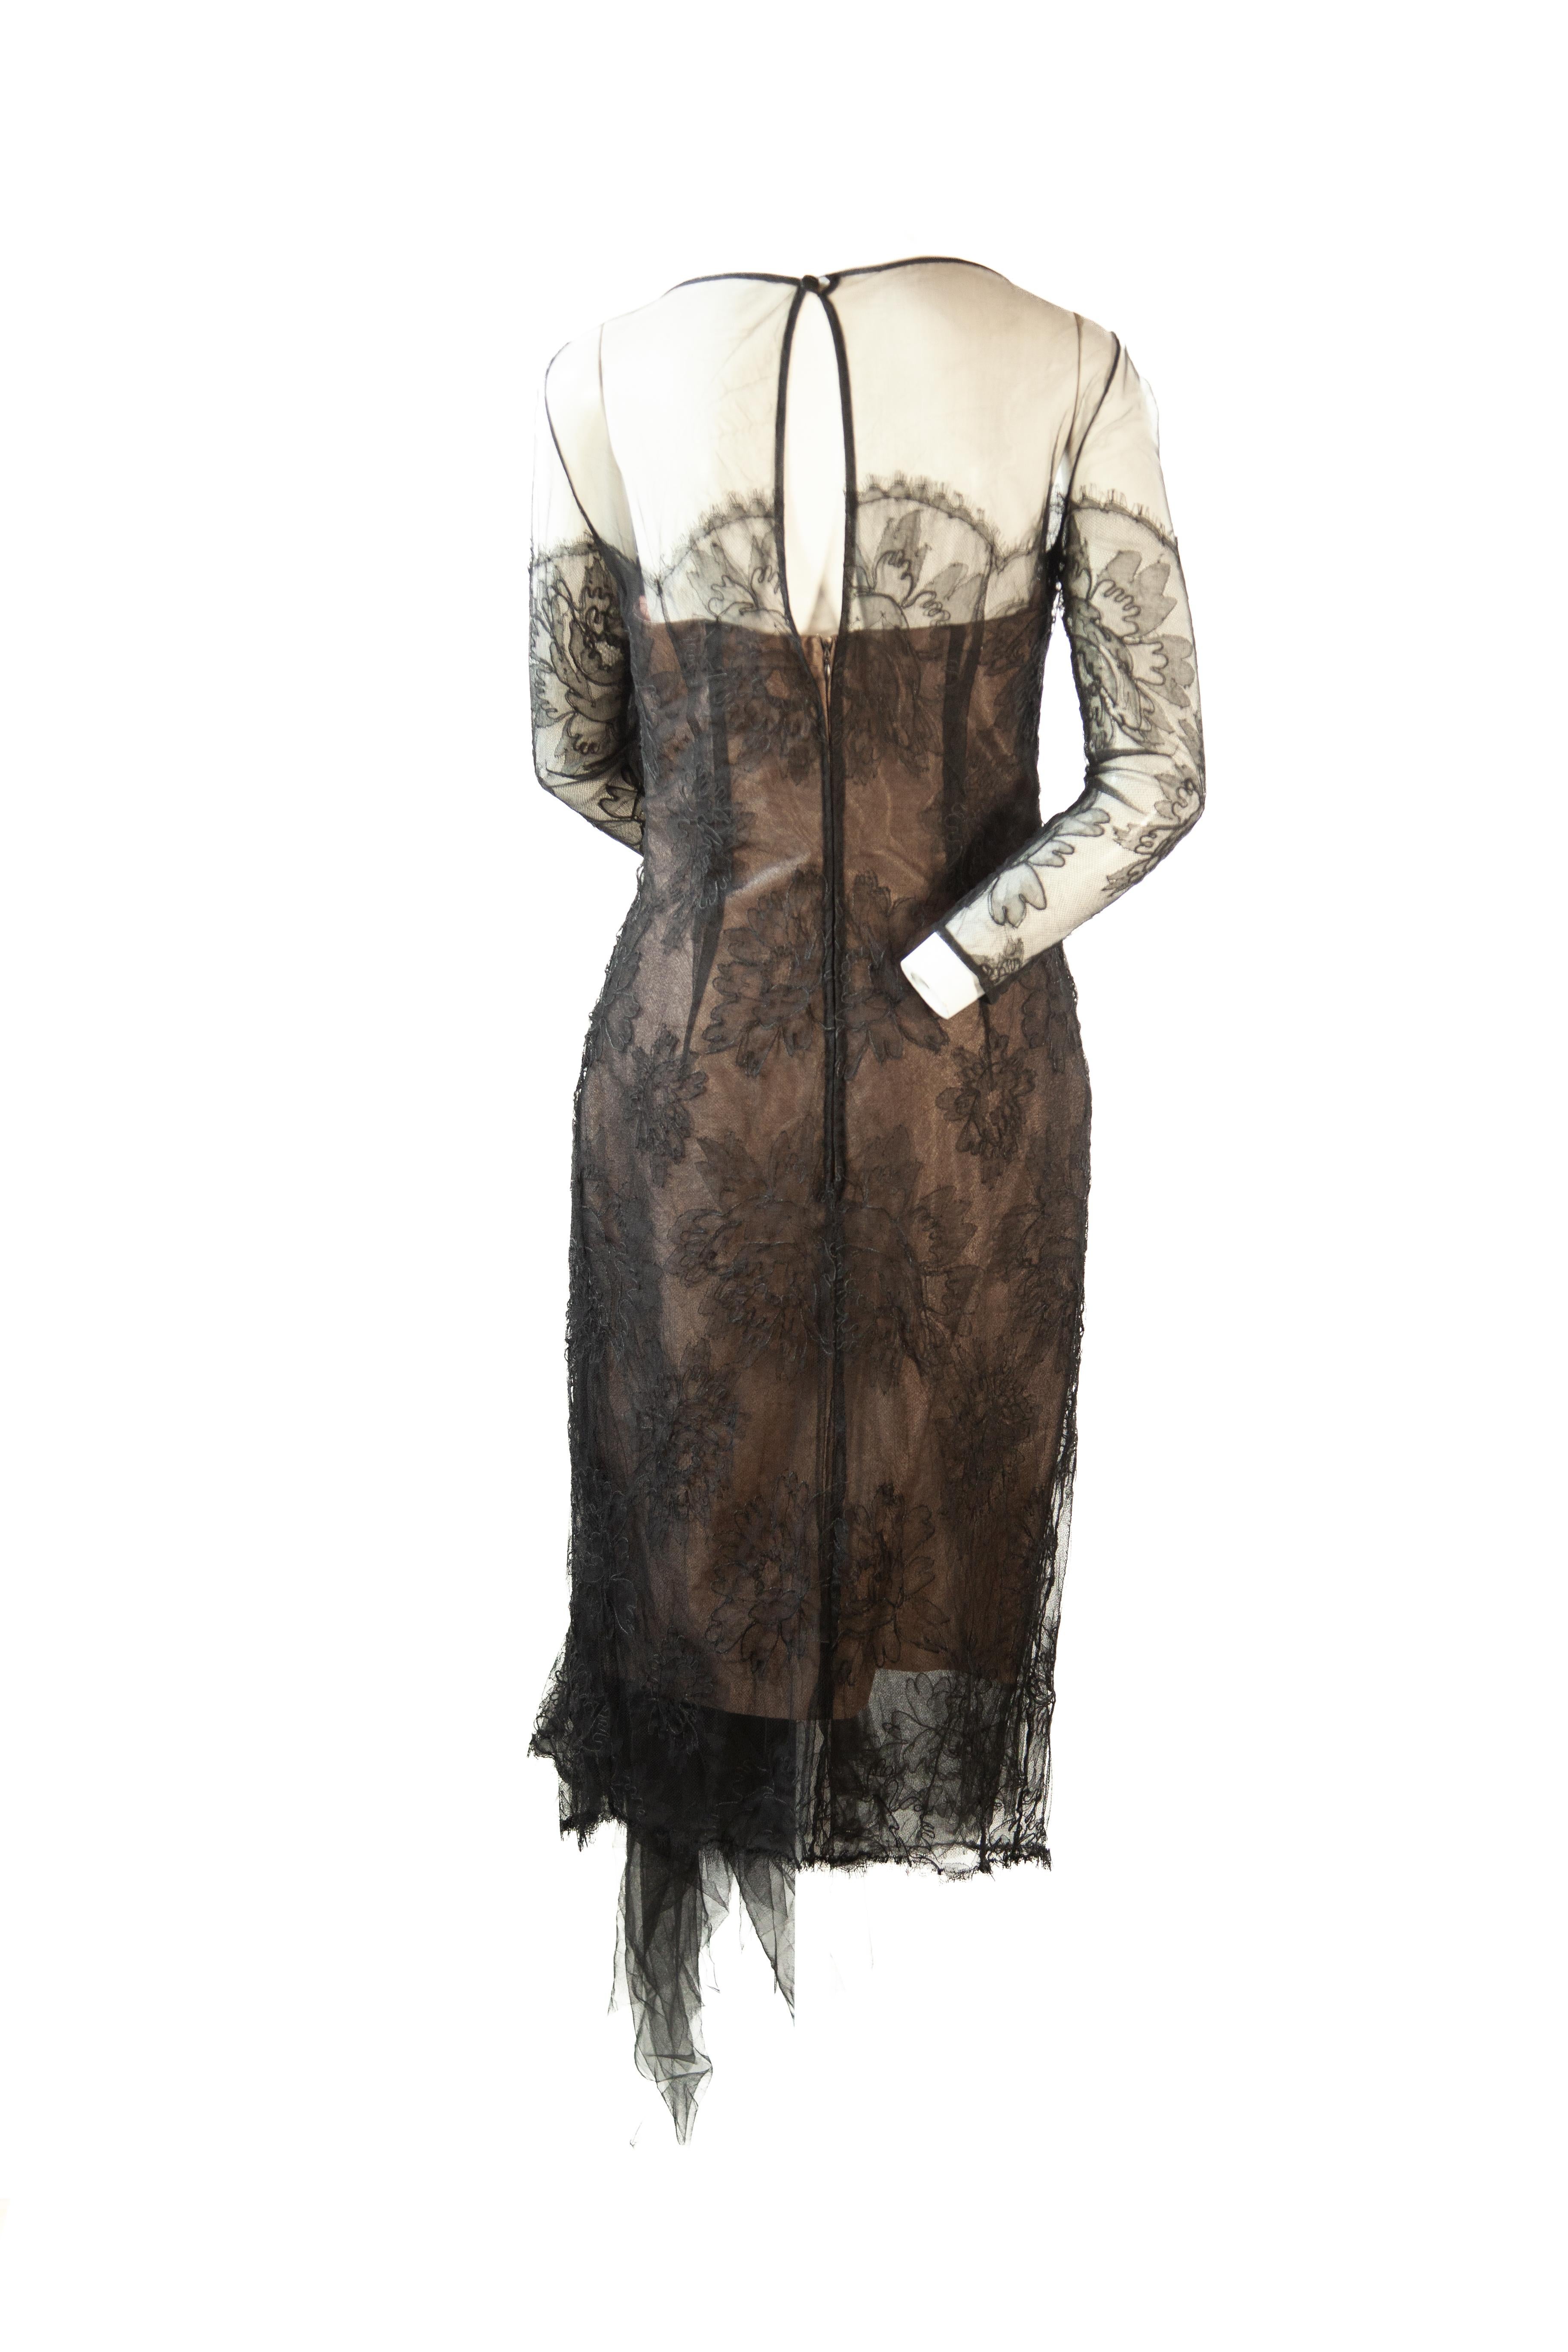 J. Perez Valette Black Lace Dress In Excellent Condition For Sale In Kingston, NY